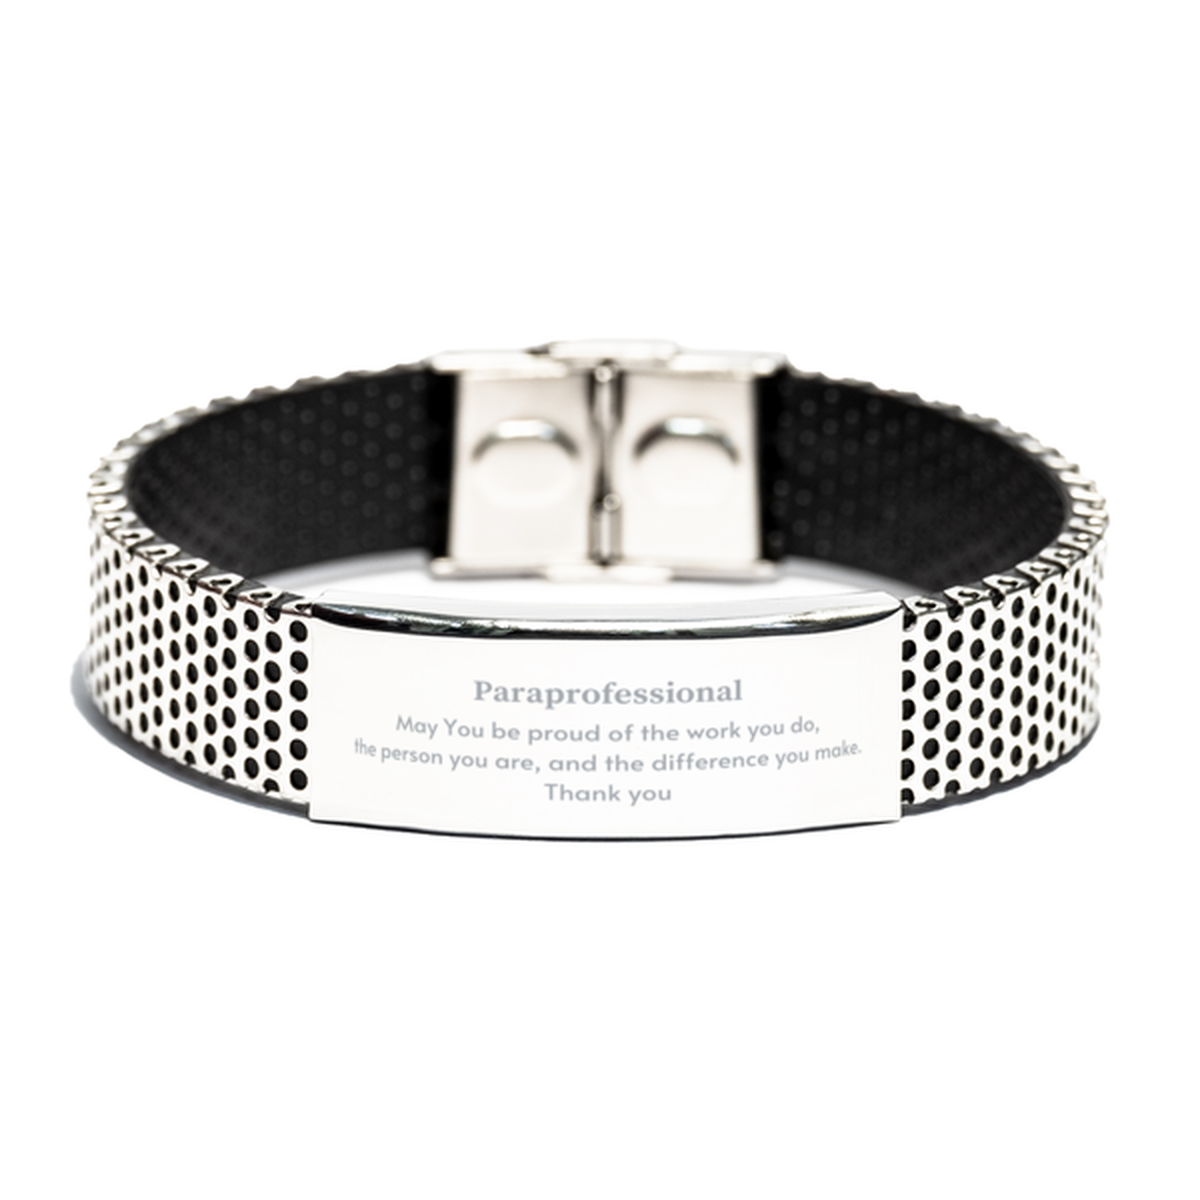 Heartwarming Stainless Steel Bracelet Retirement Coworkers Gifts for Paraprofessional, Paraprofessional May You be proud of the work you do, the person you are Gifts for Boss Men Women Friends